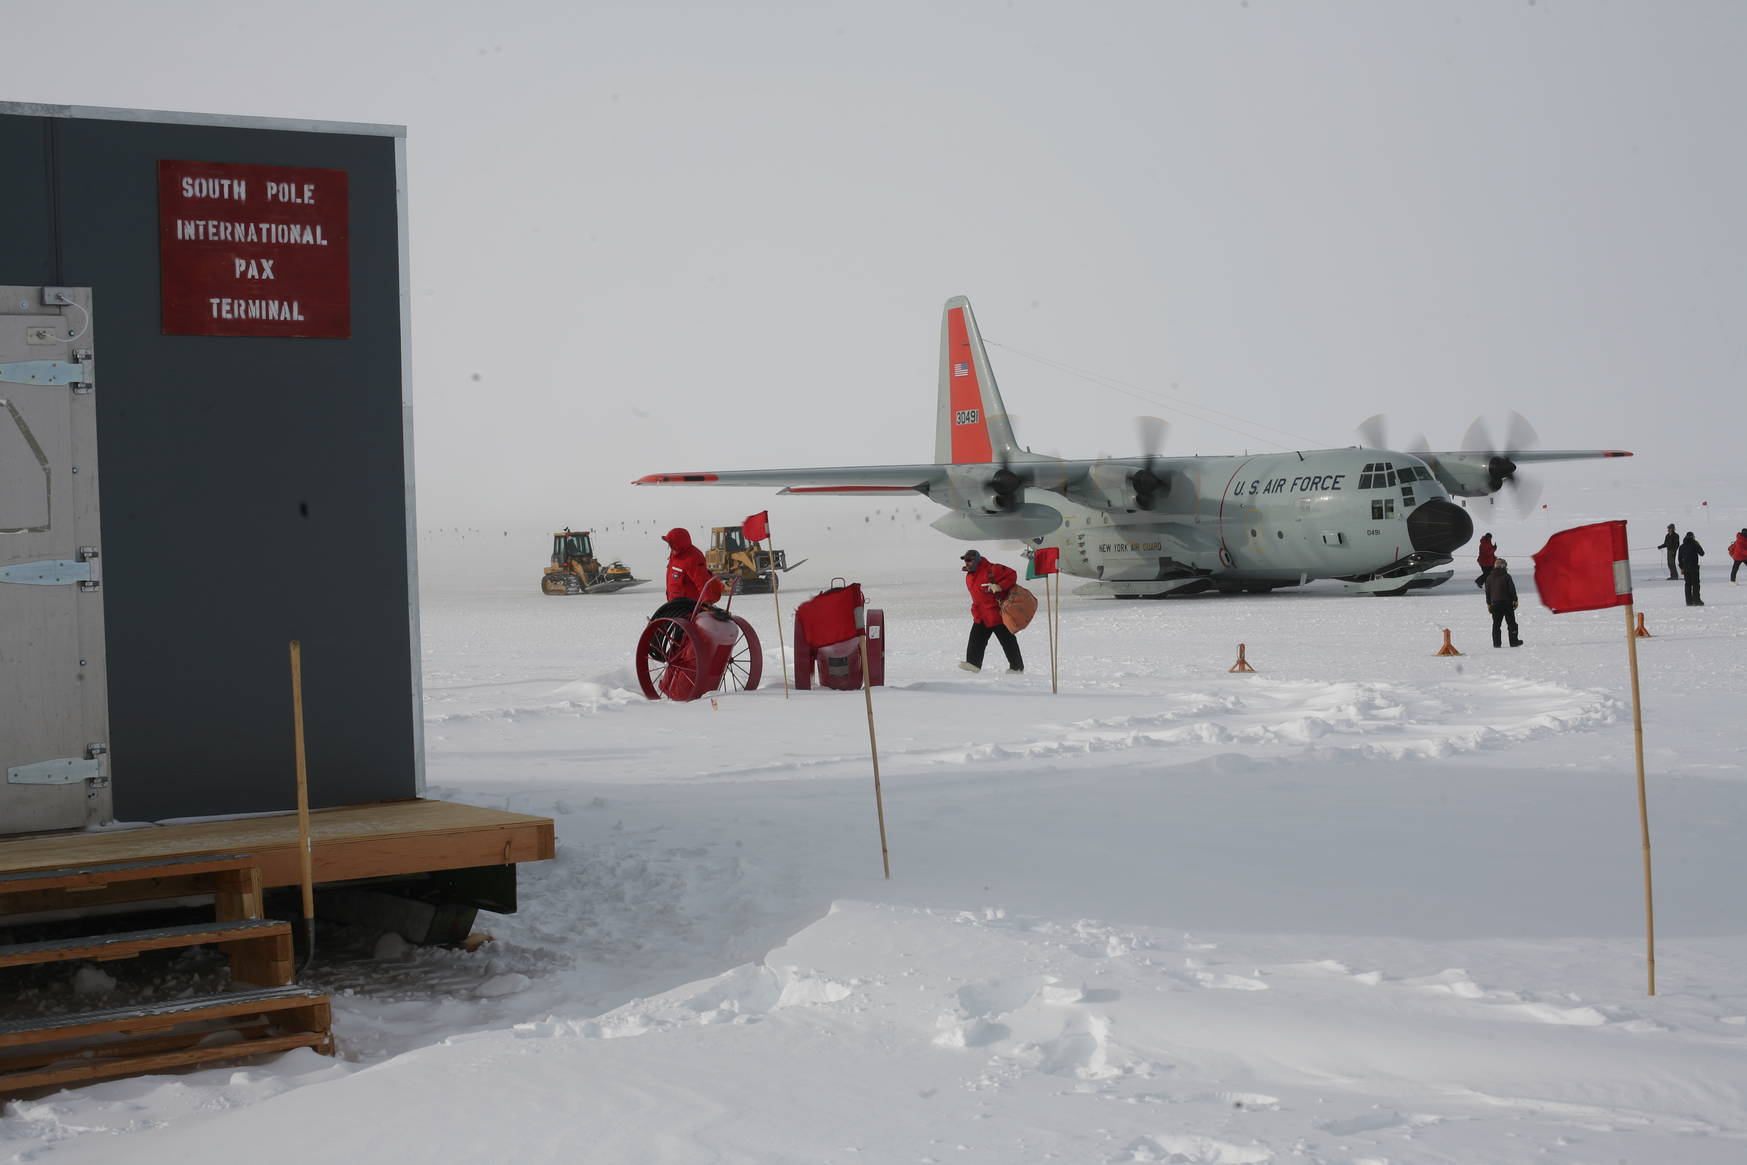 Arrival at the South Pole Passenger terminal. Psssst, secret: It's really just a small metal shack.